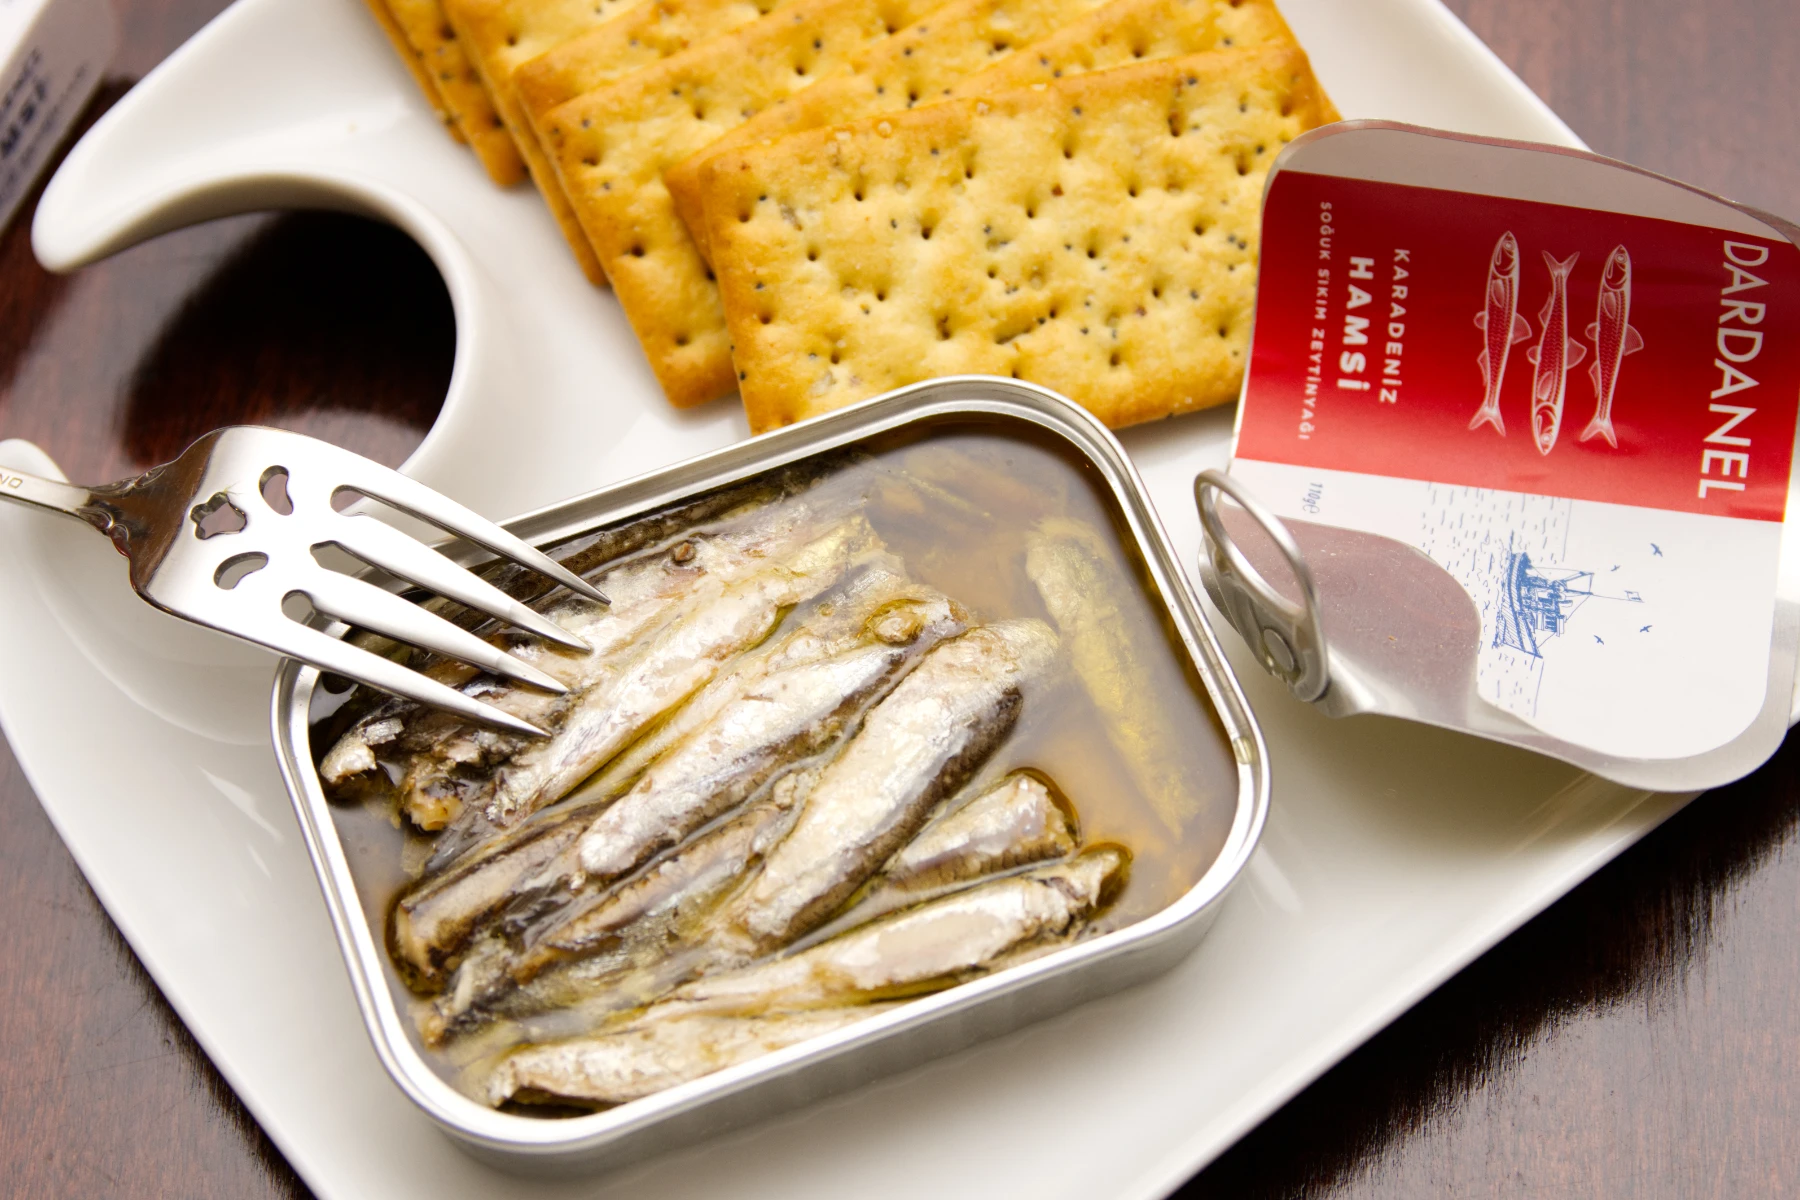 Tin of opened anchovies on a plate with crackers. Fish is stacked in pile in a pool of olive oil.